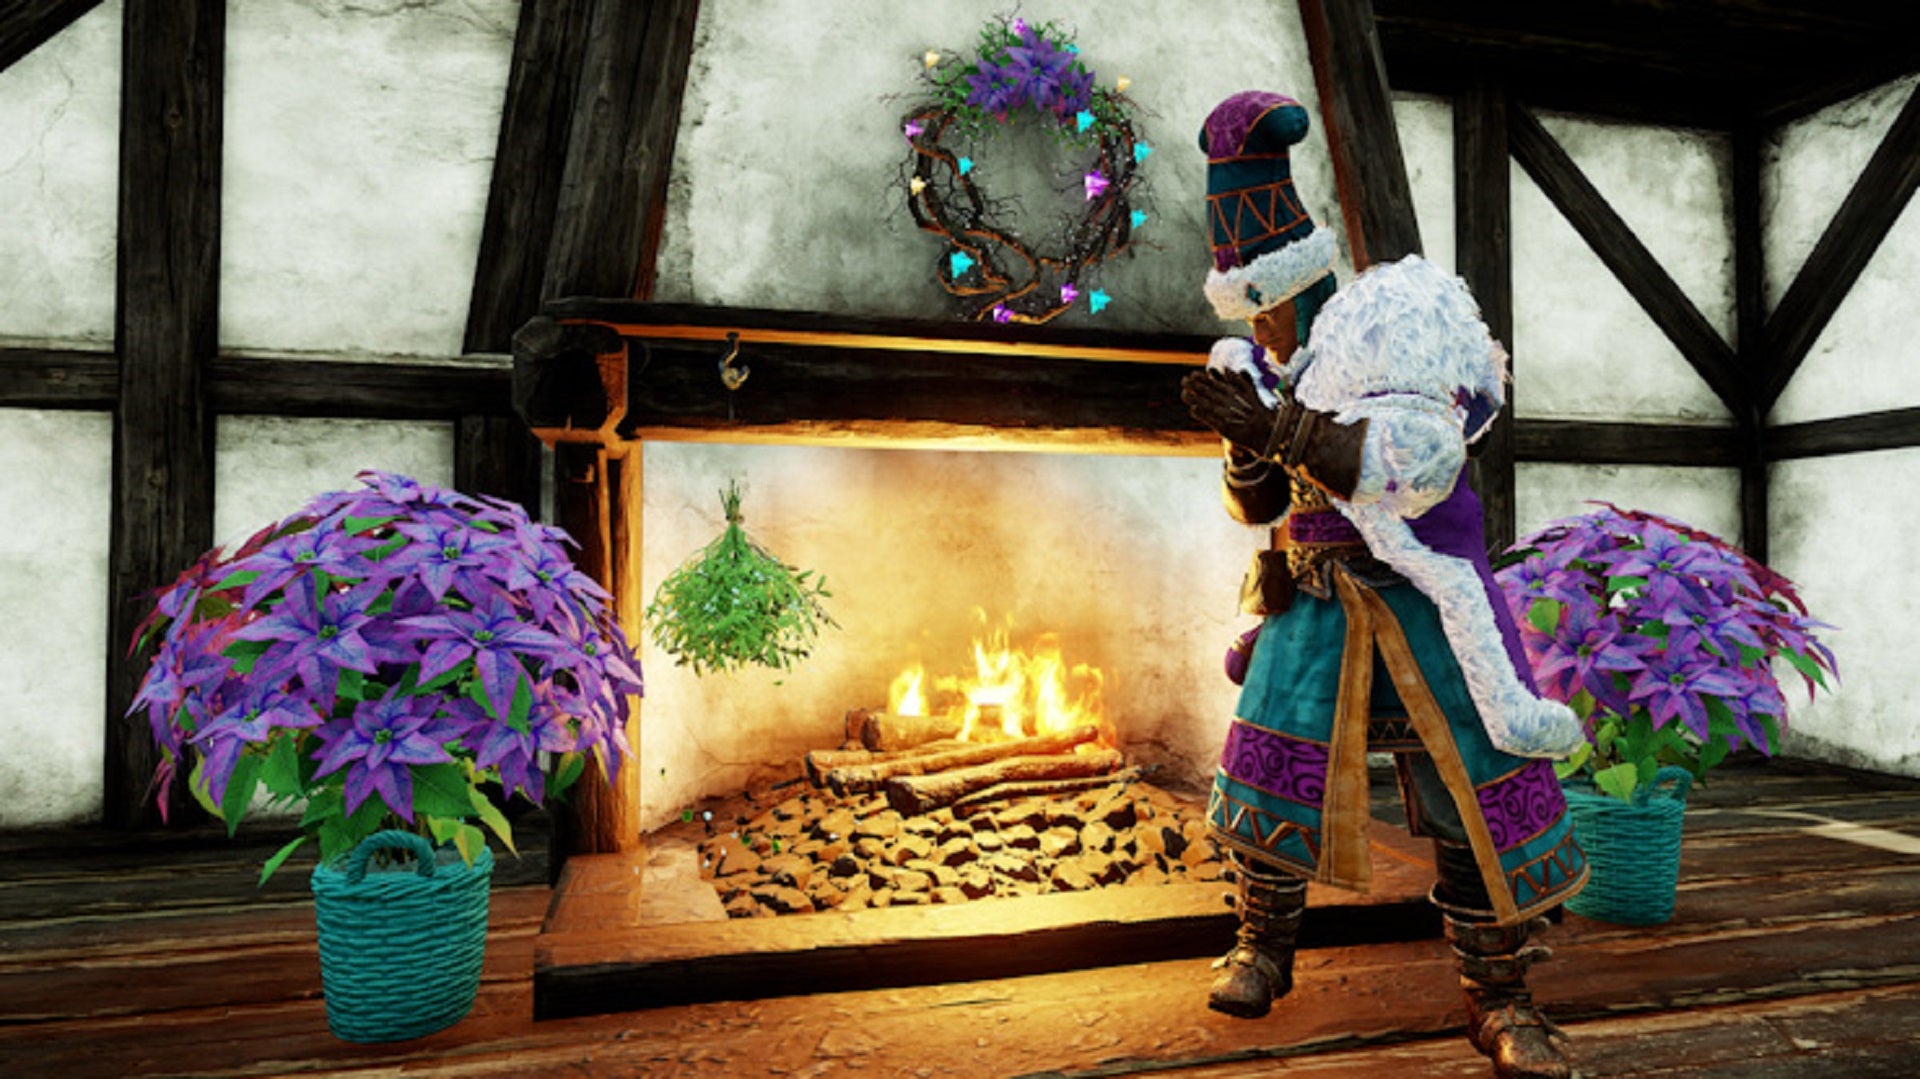 A Santa-like New World character warms his hands by a roaring fire, flanked by Poinsettias, wreaths, and mistletoe.